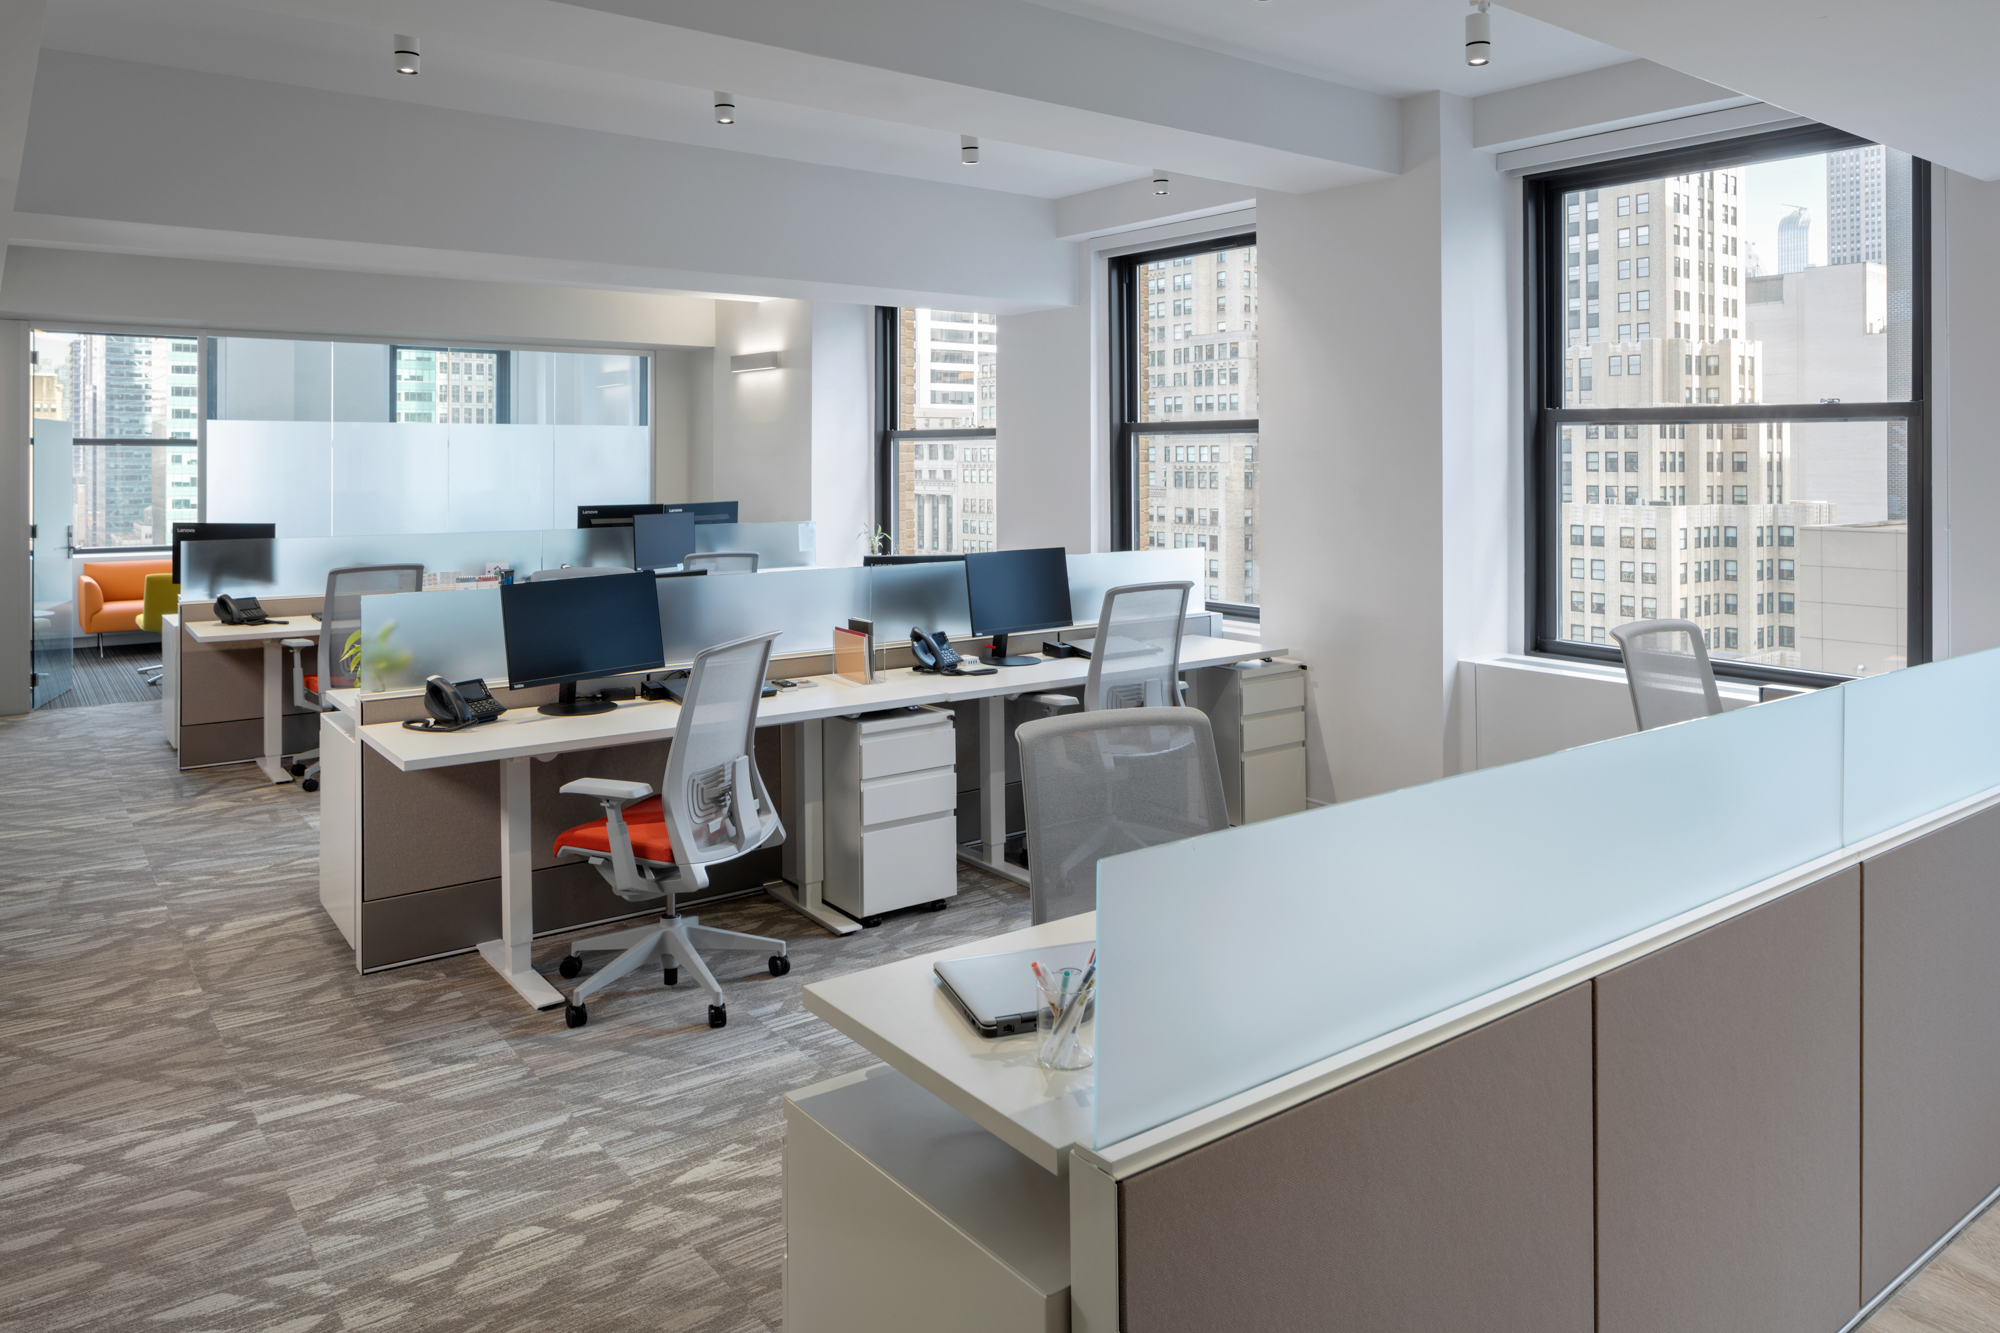 The open space encourages communication. Sit-stand desks & ergonomic chairs help people's health.